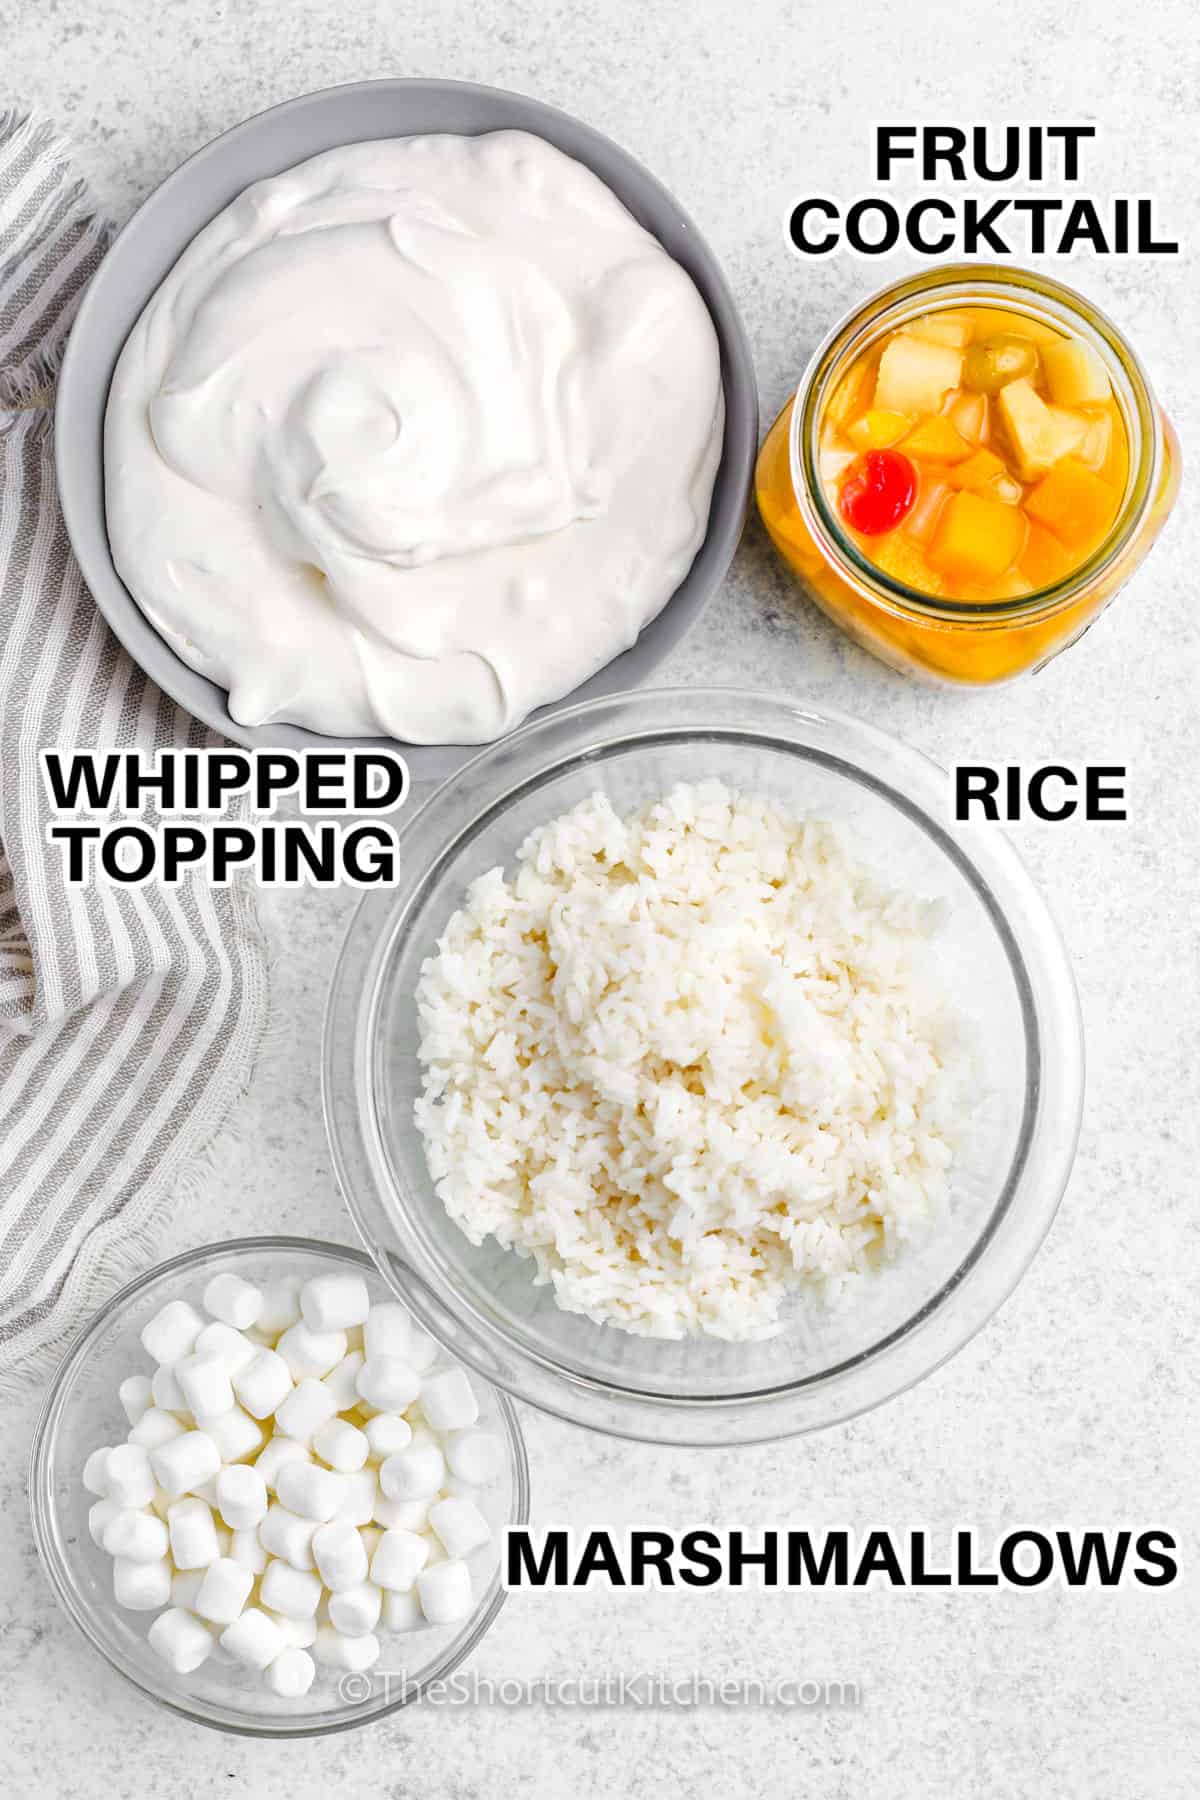 whipped topping , fruit cocktail , rice and marshmallows to make Glorified Rice with labels